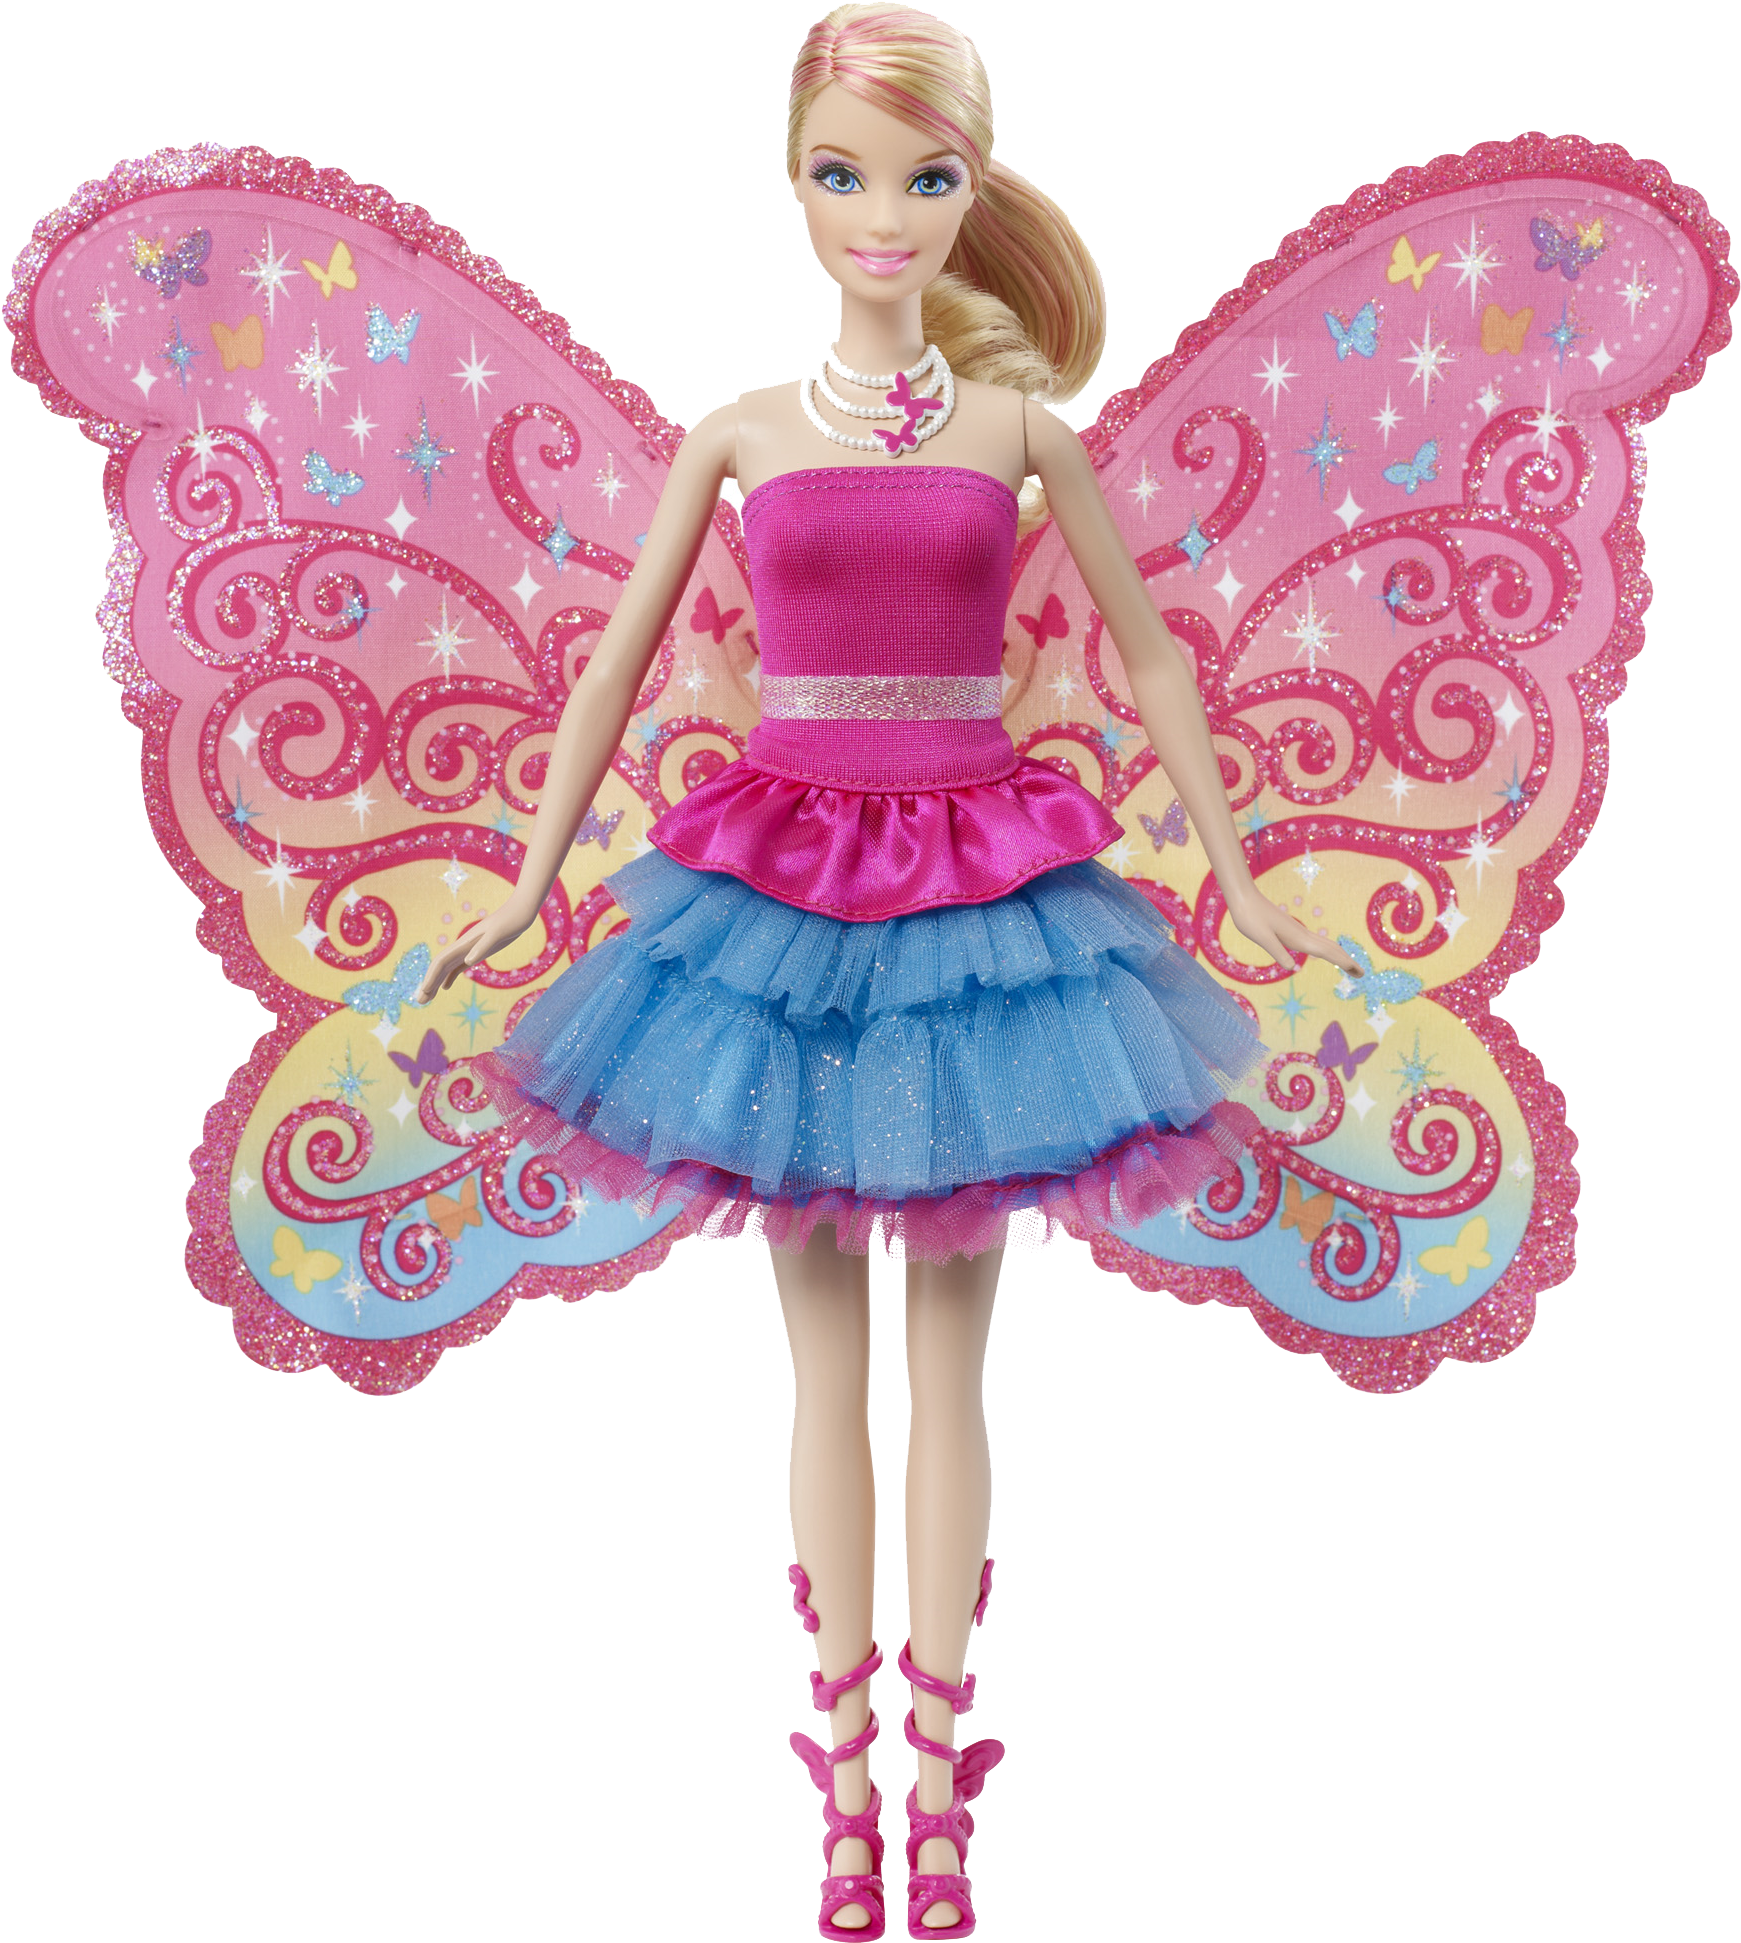 A Barbie Doll With Wings